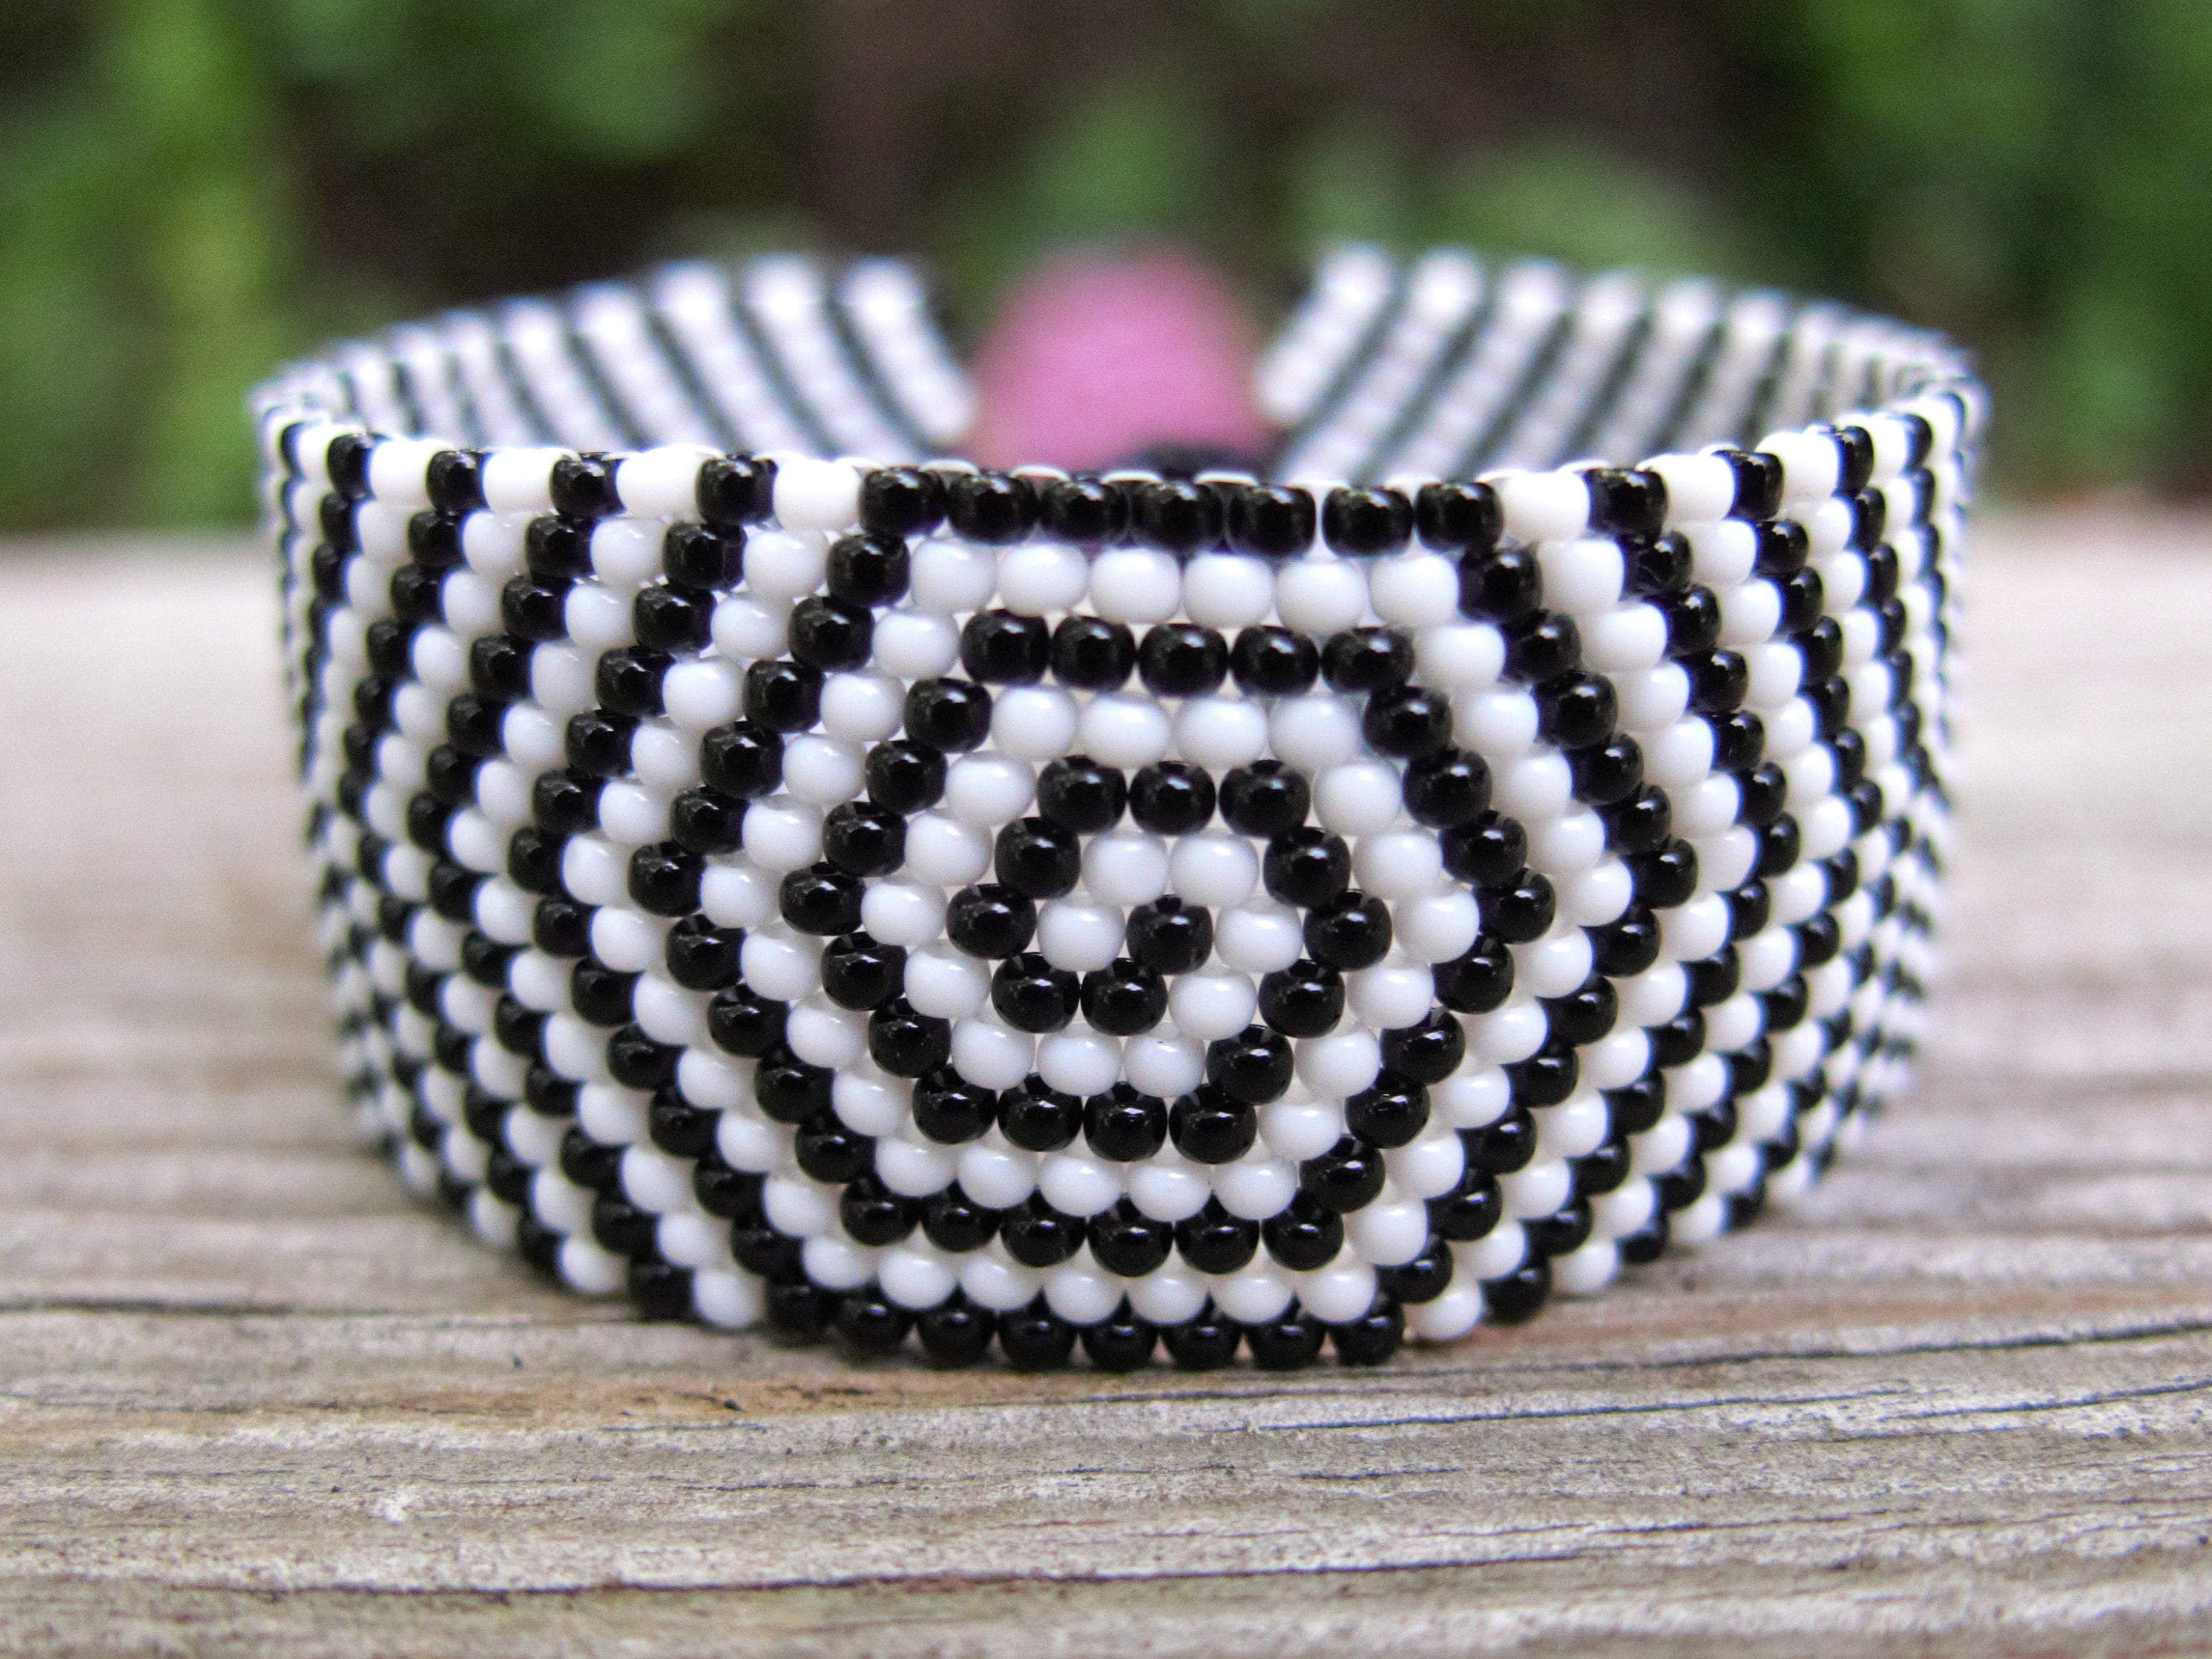 Peyote Stitched Handmade Clearance Sale Needle Beaded Cuff Bracelet in an Art Deco Design in Black and Silver